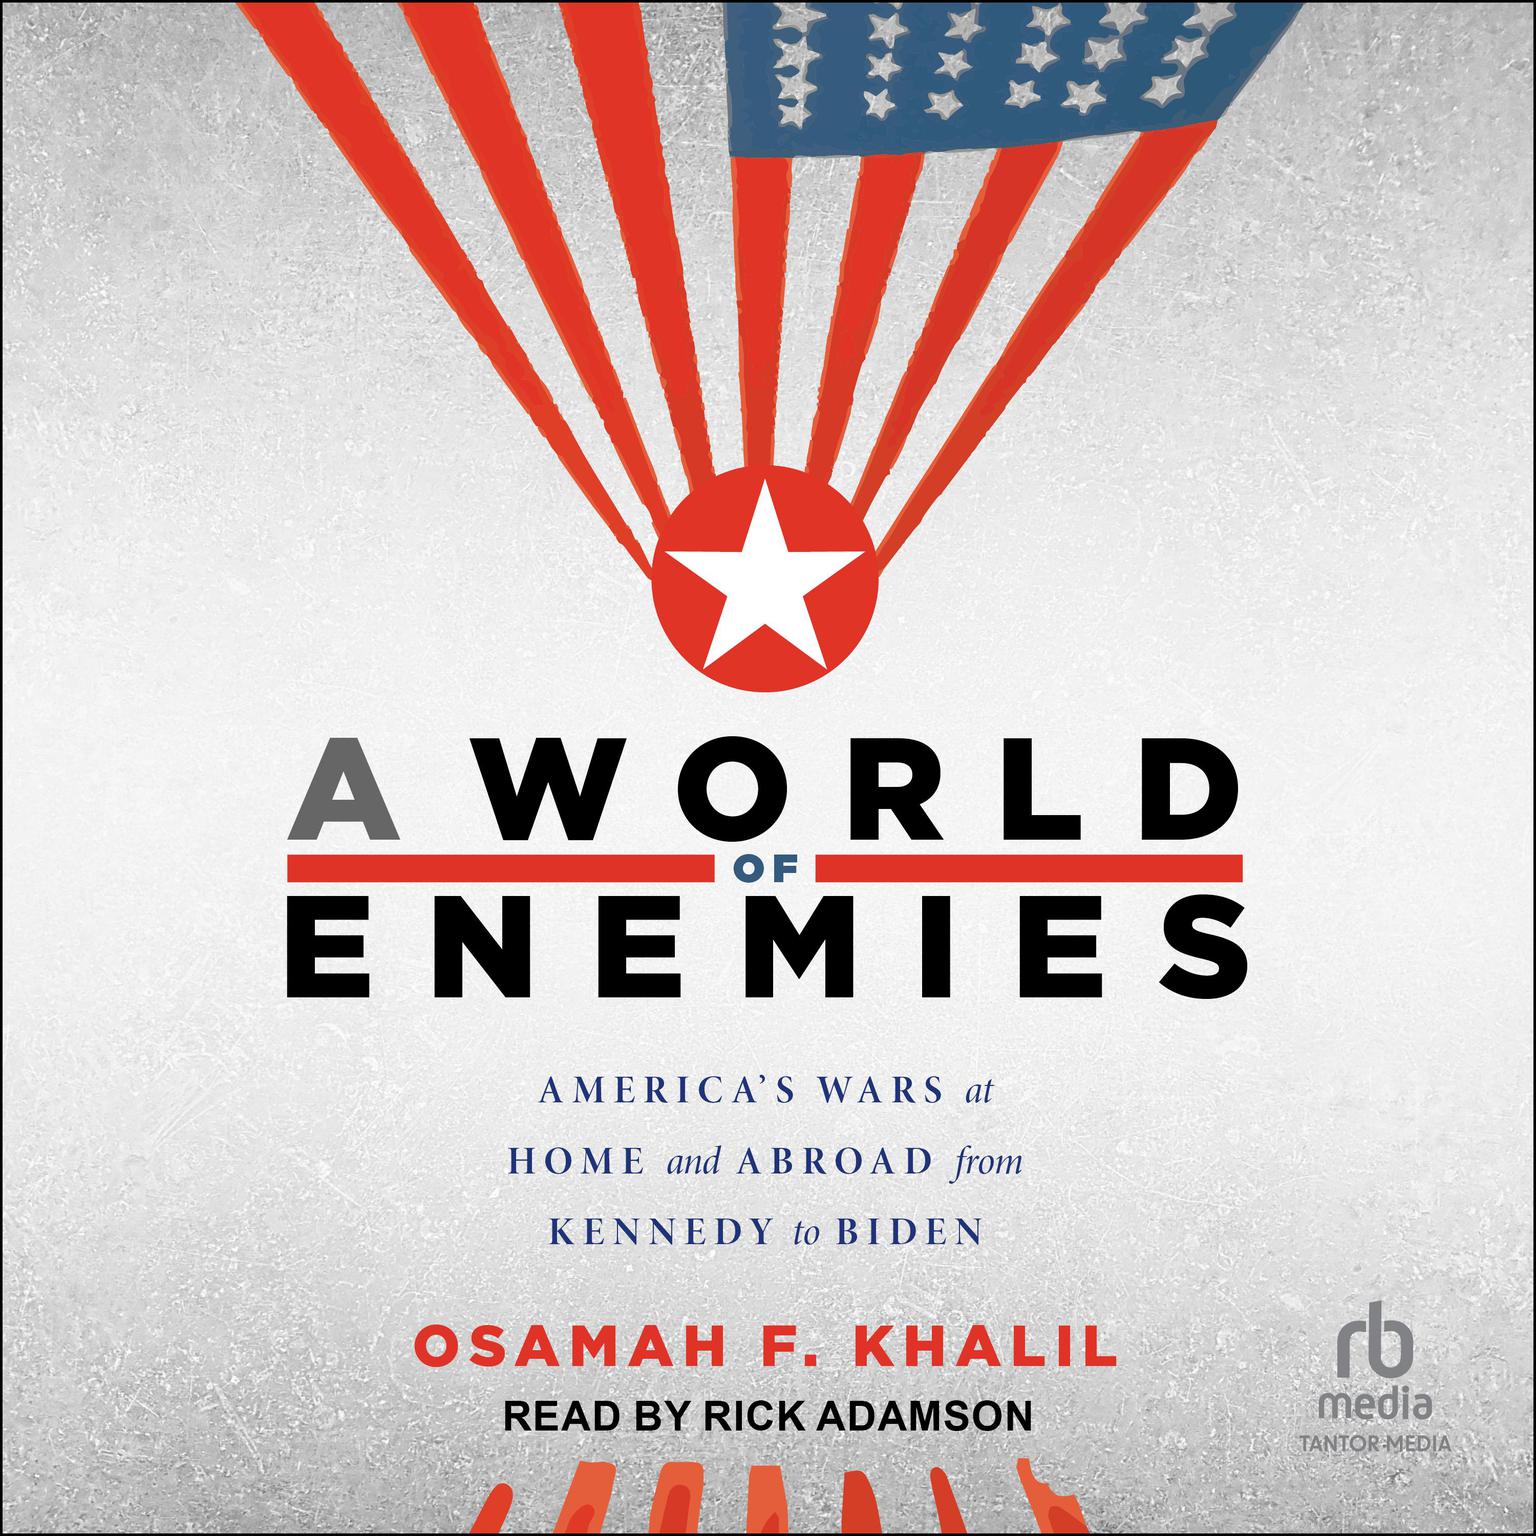 A World of Enemies: Americas Wars at Home and Abroad from Kennedy to Biden Audiobook, by Osamah F. Khalil